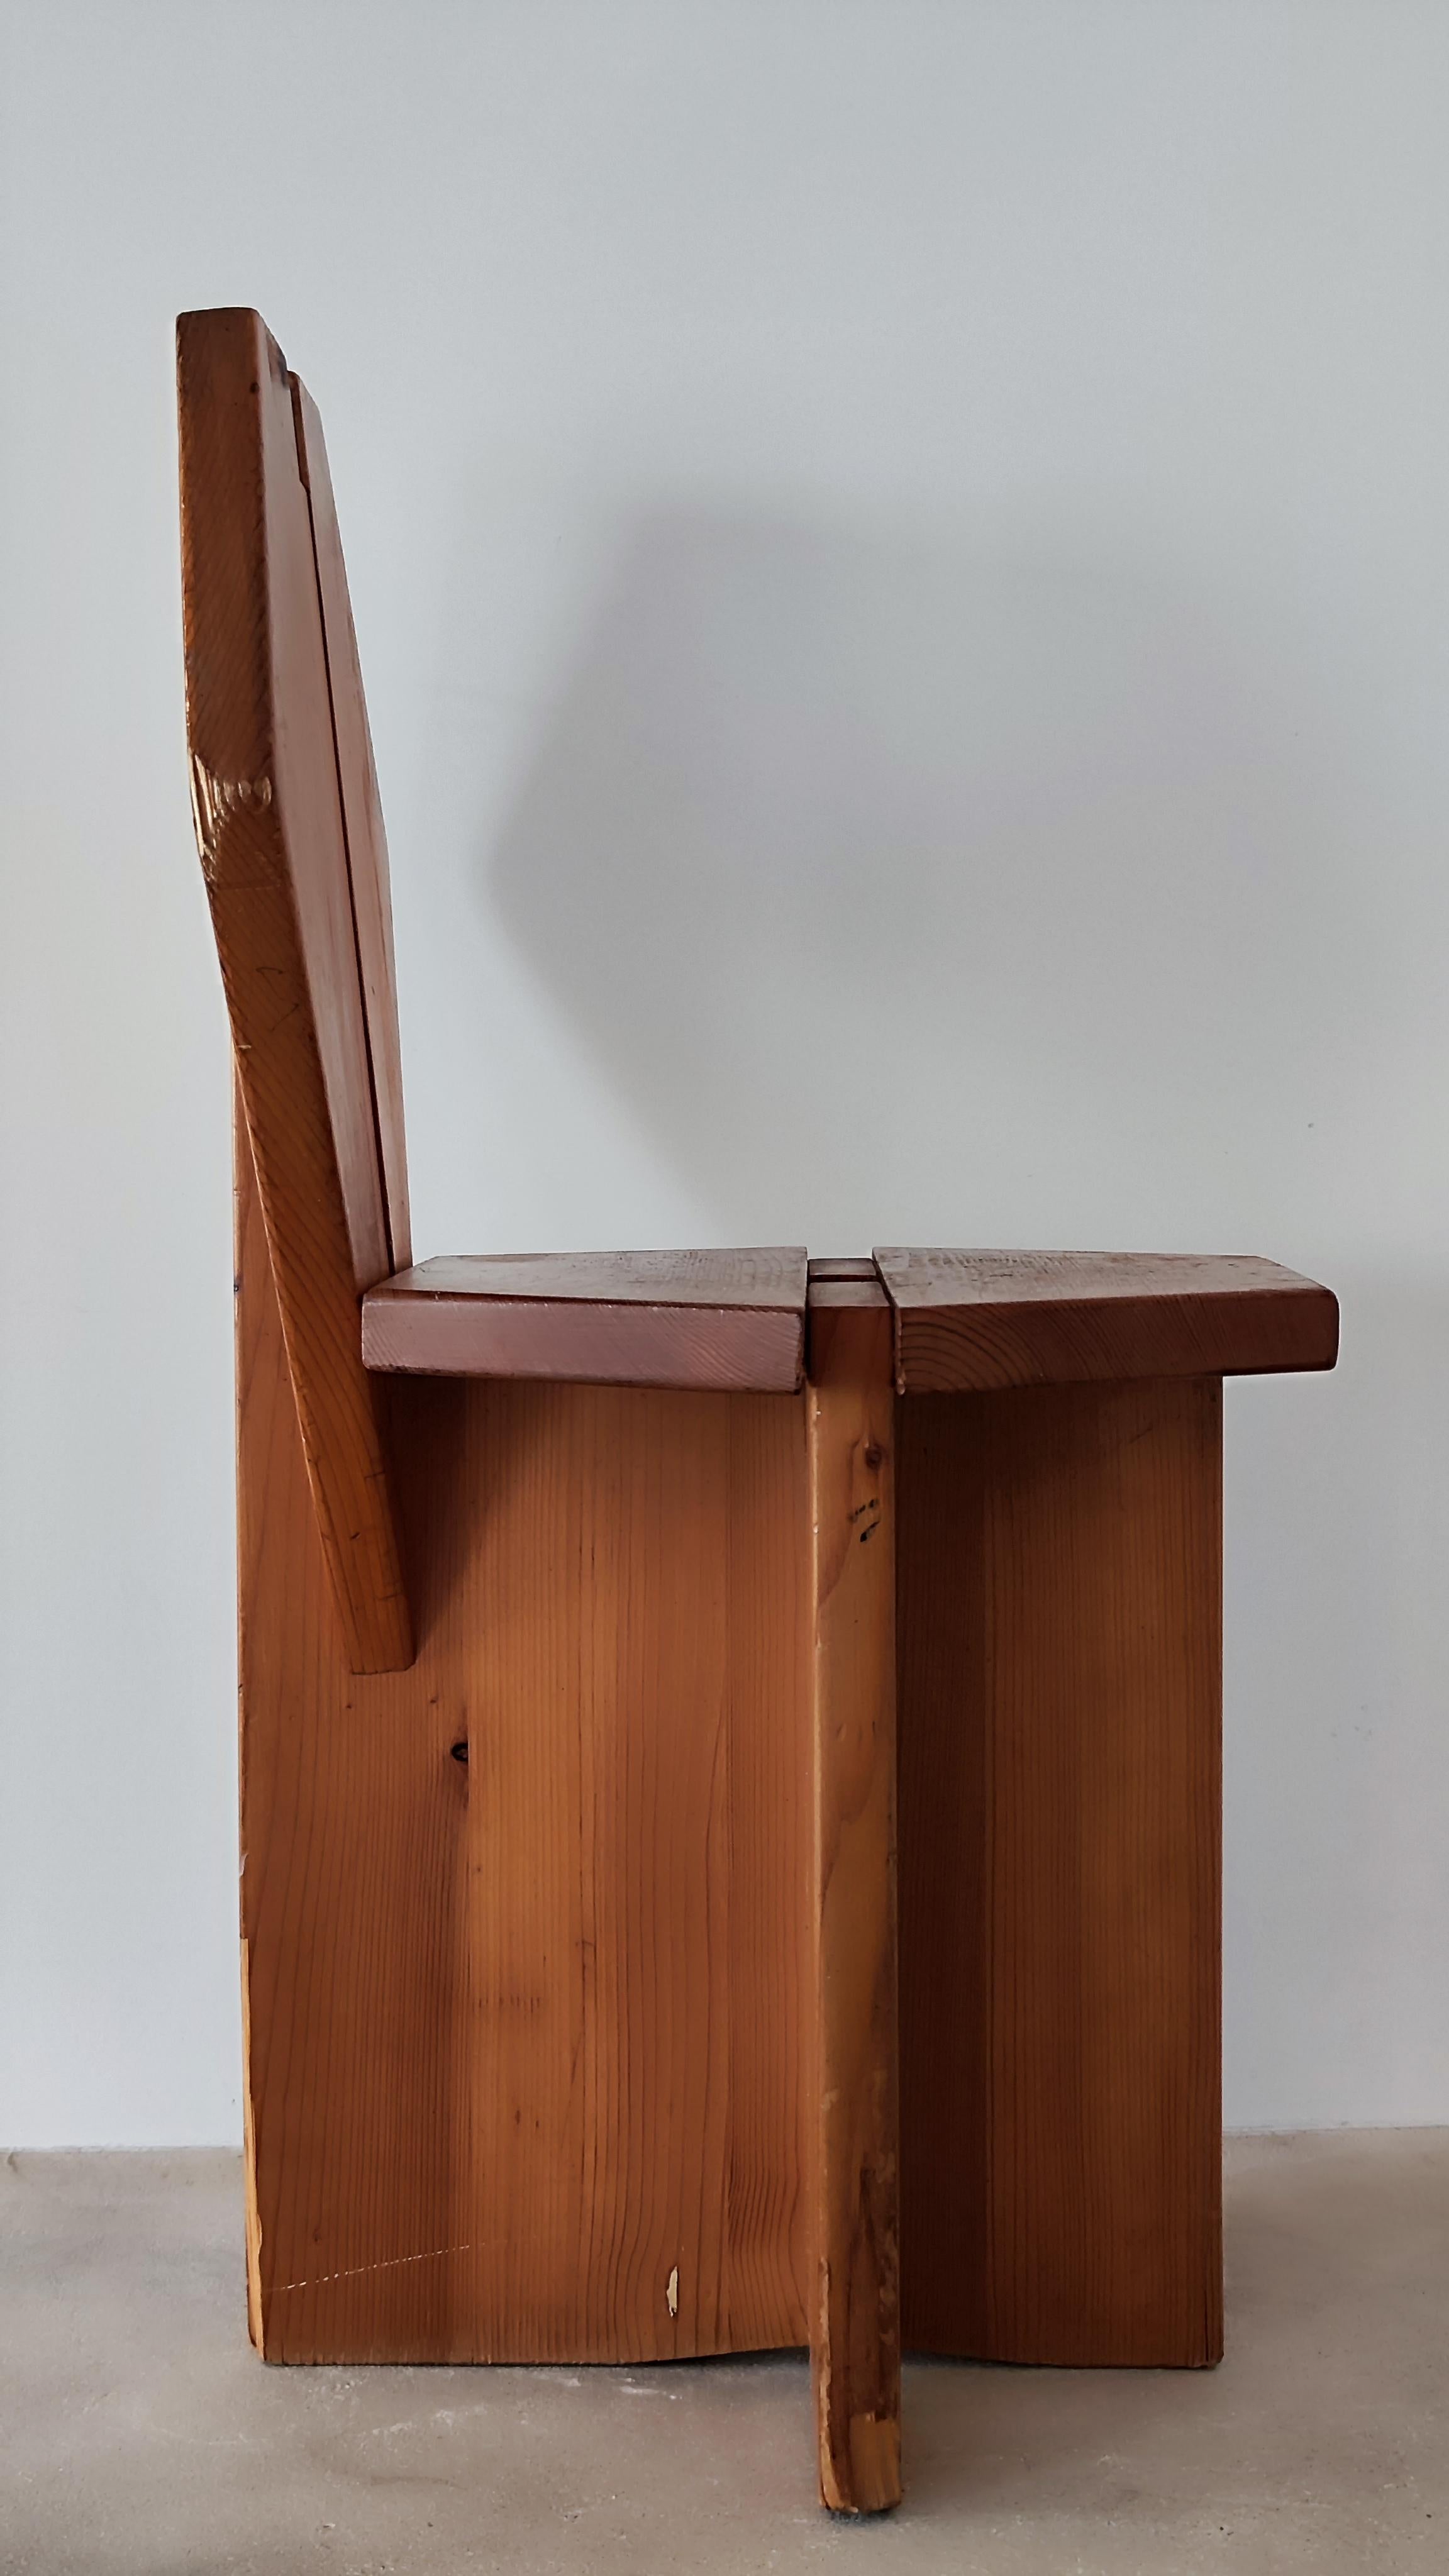 Pine 60s brutalist pine chair, France, Méribel - René Martin for Charlotte Perriand